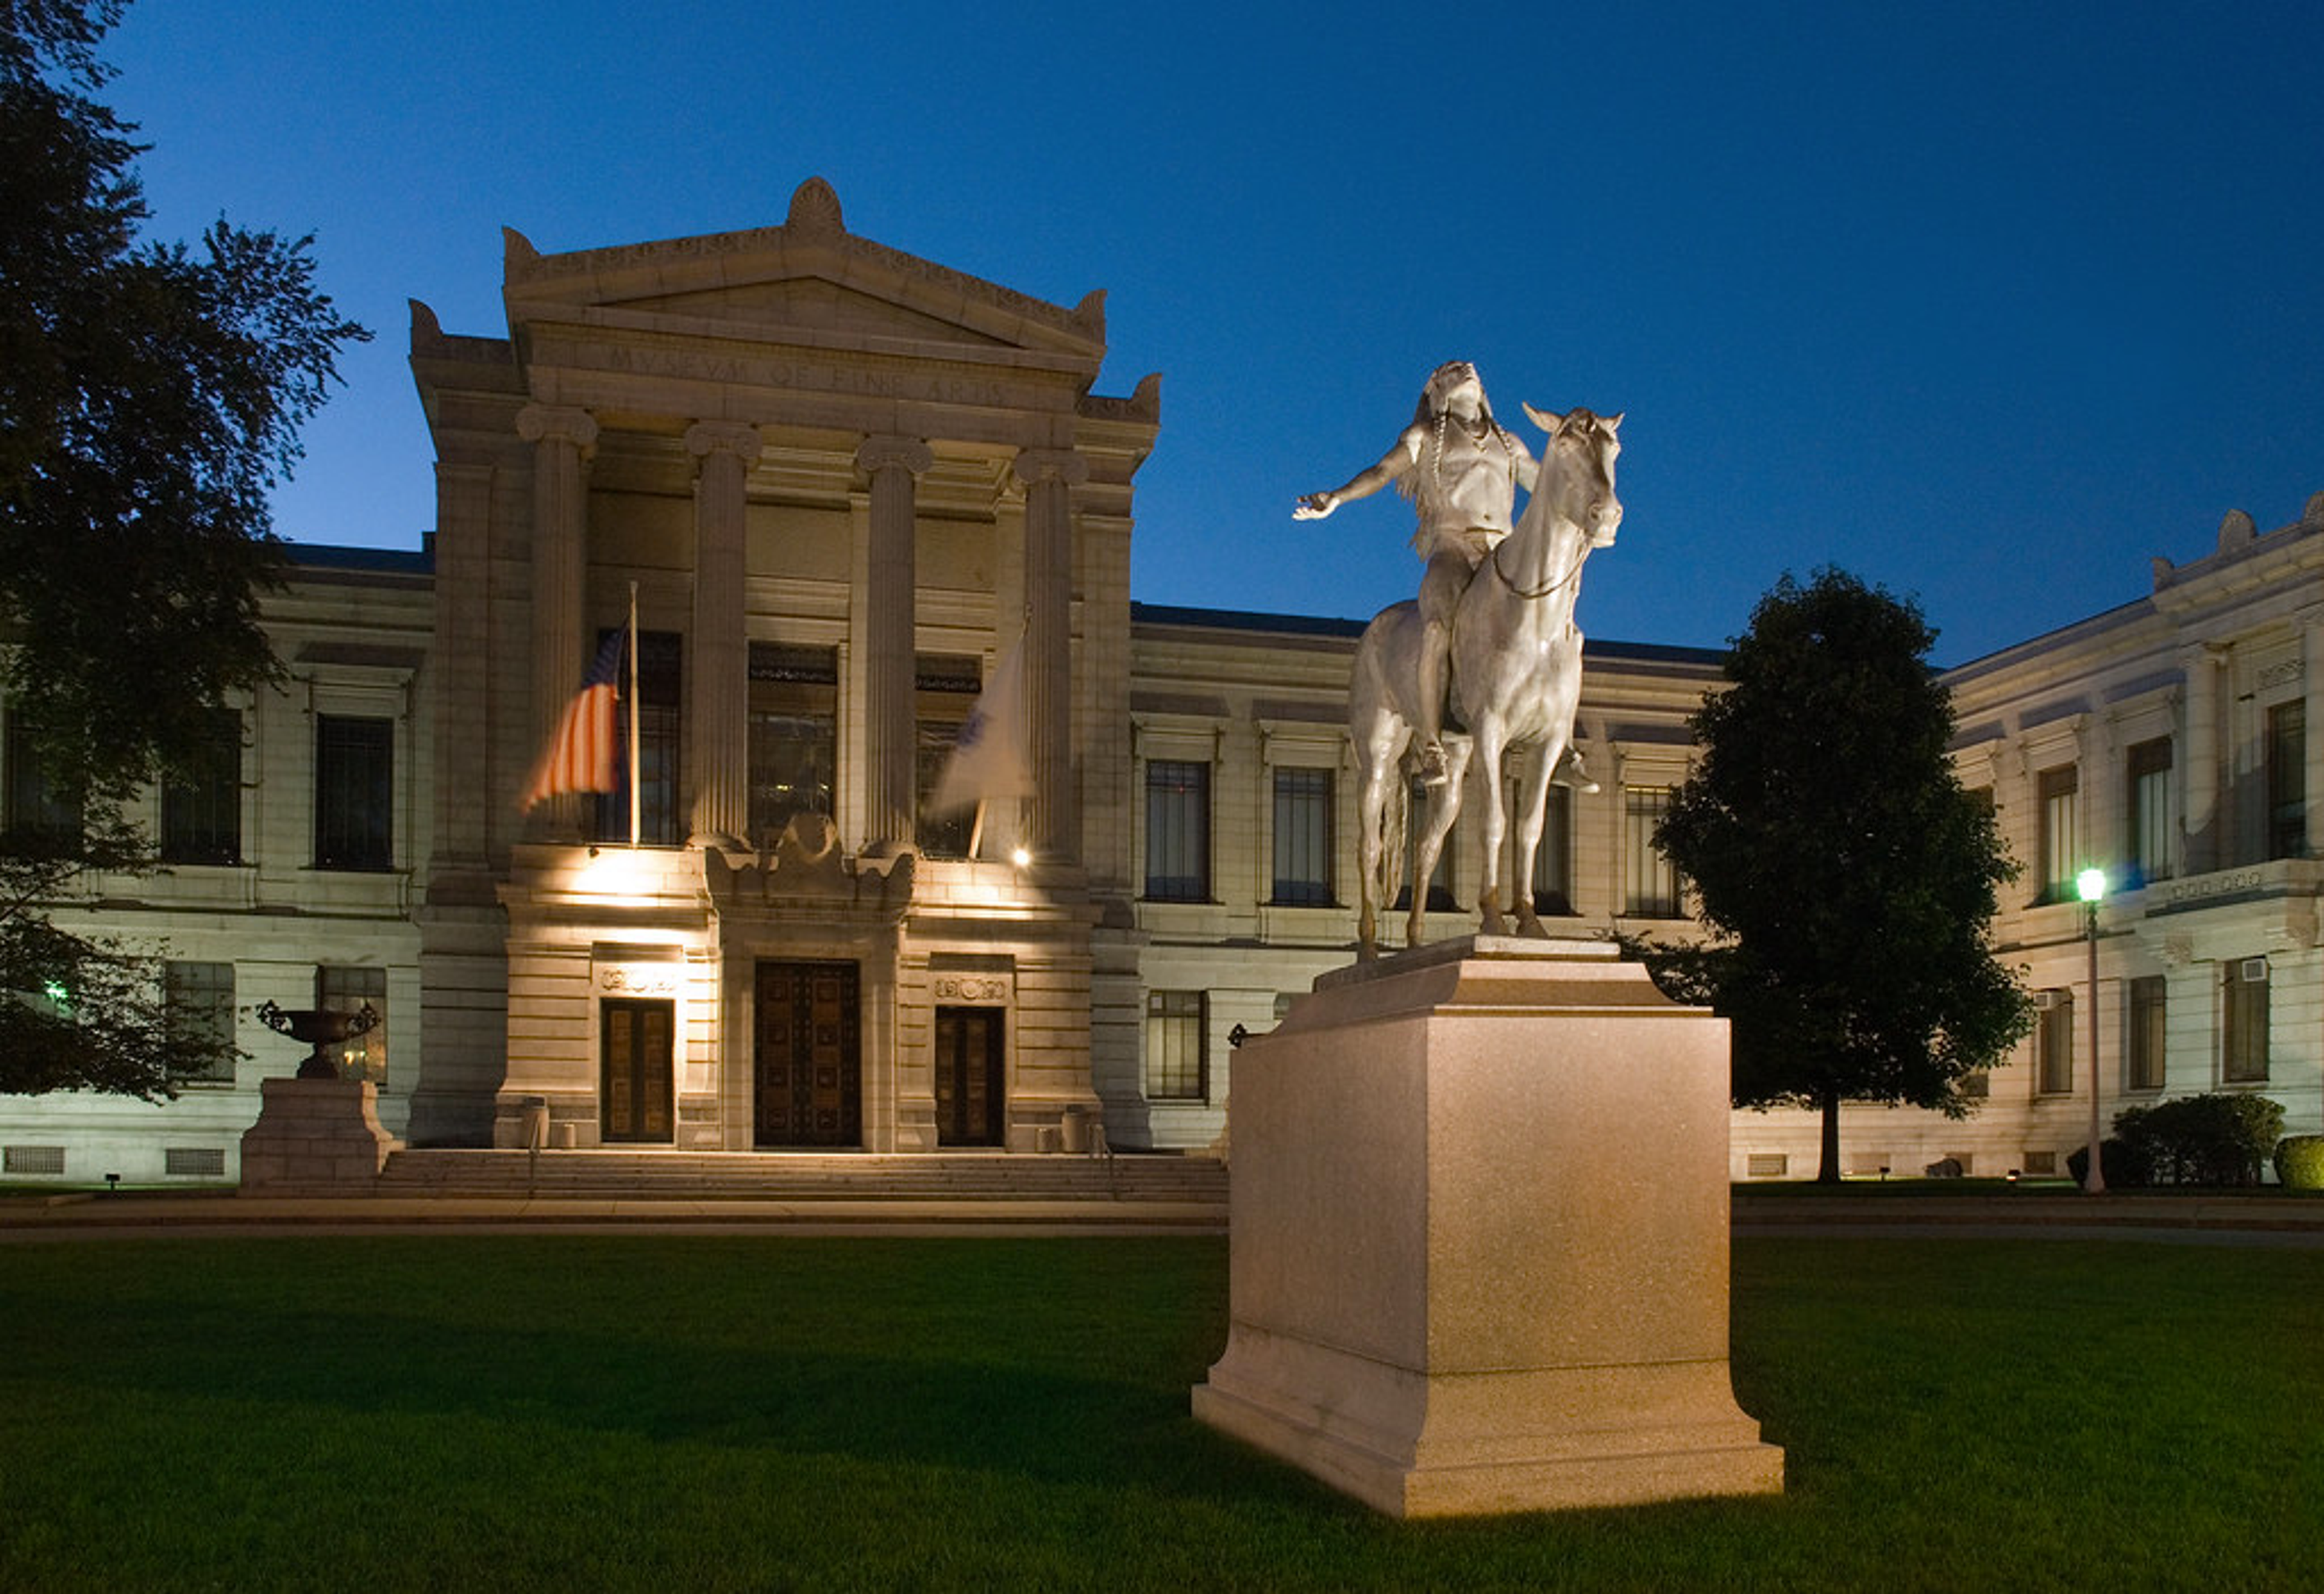 An outdoor image of the Museum of Fine Arts, Boston in the evening. It shows the building's facade and an equestrian statue.